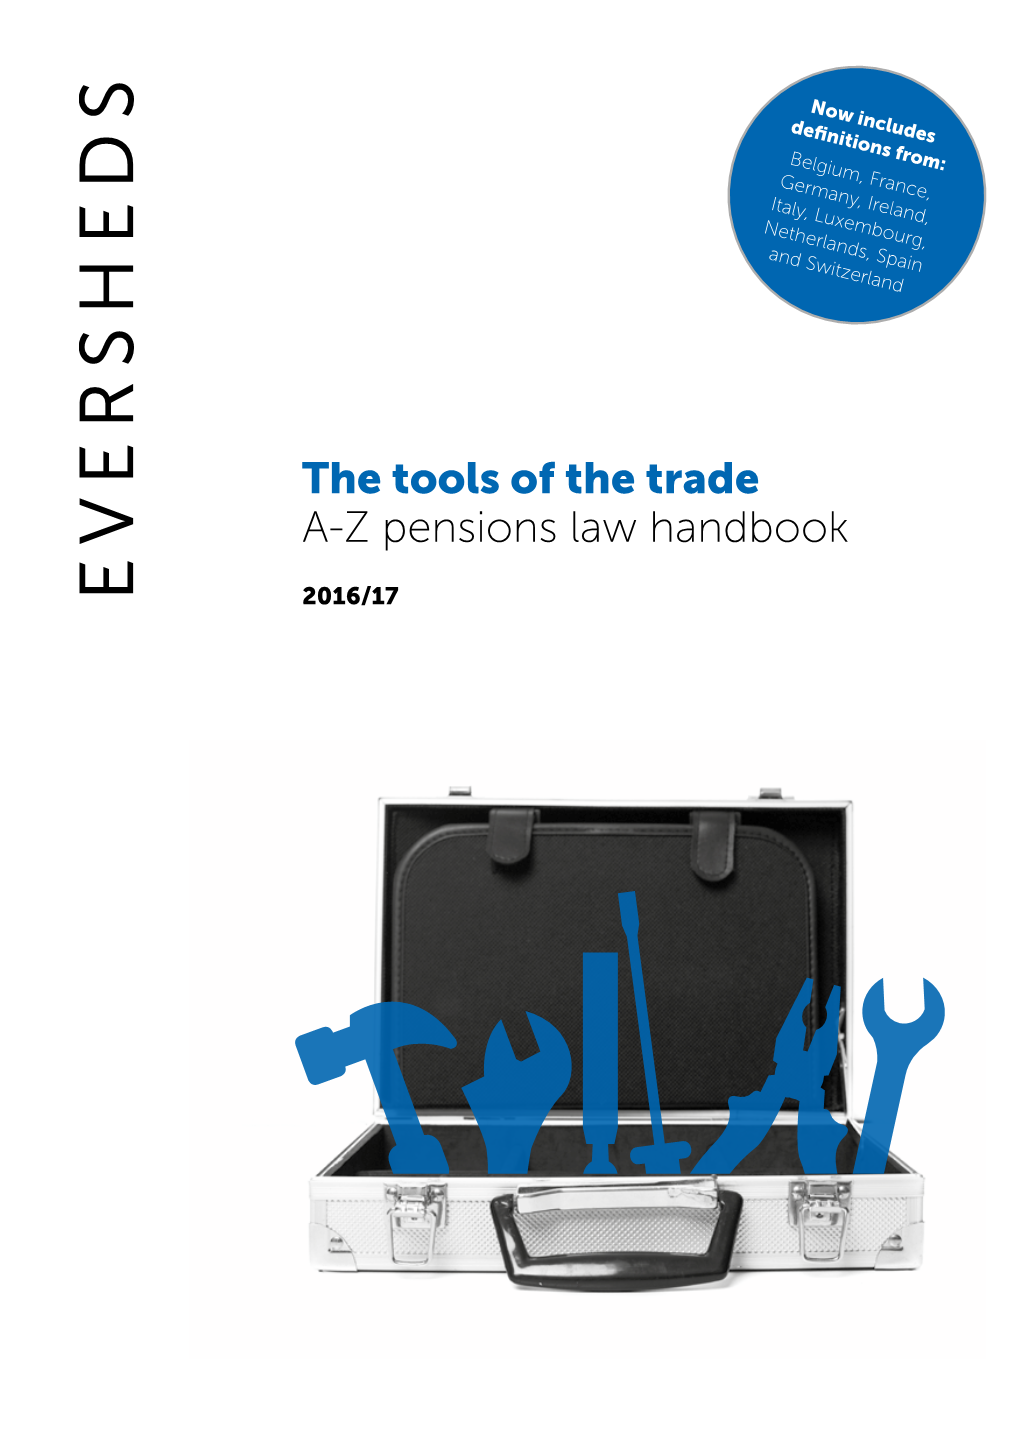 The Tools of the Trade A-Z Pensions Law Handbook